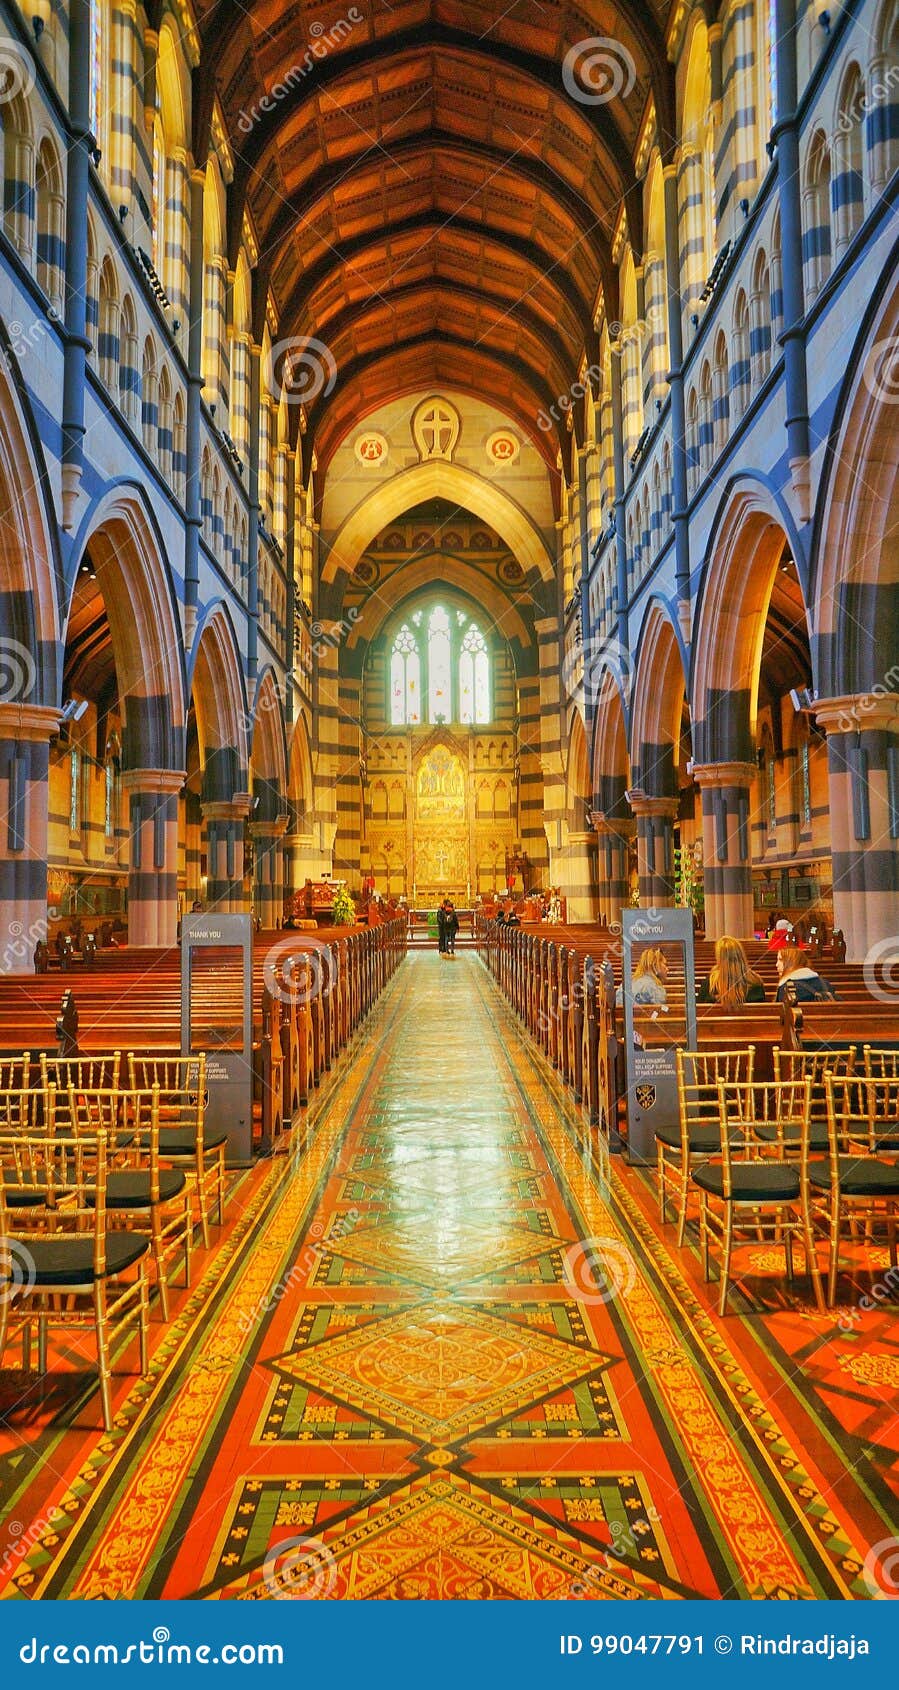 Beautiful And Colorful Interior Of St Paul S Cathedral In